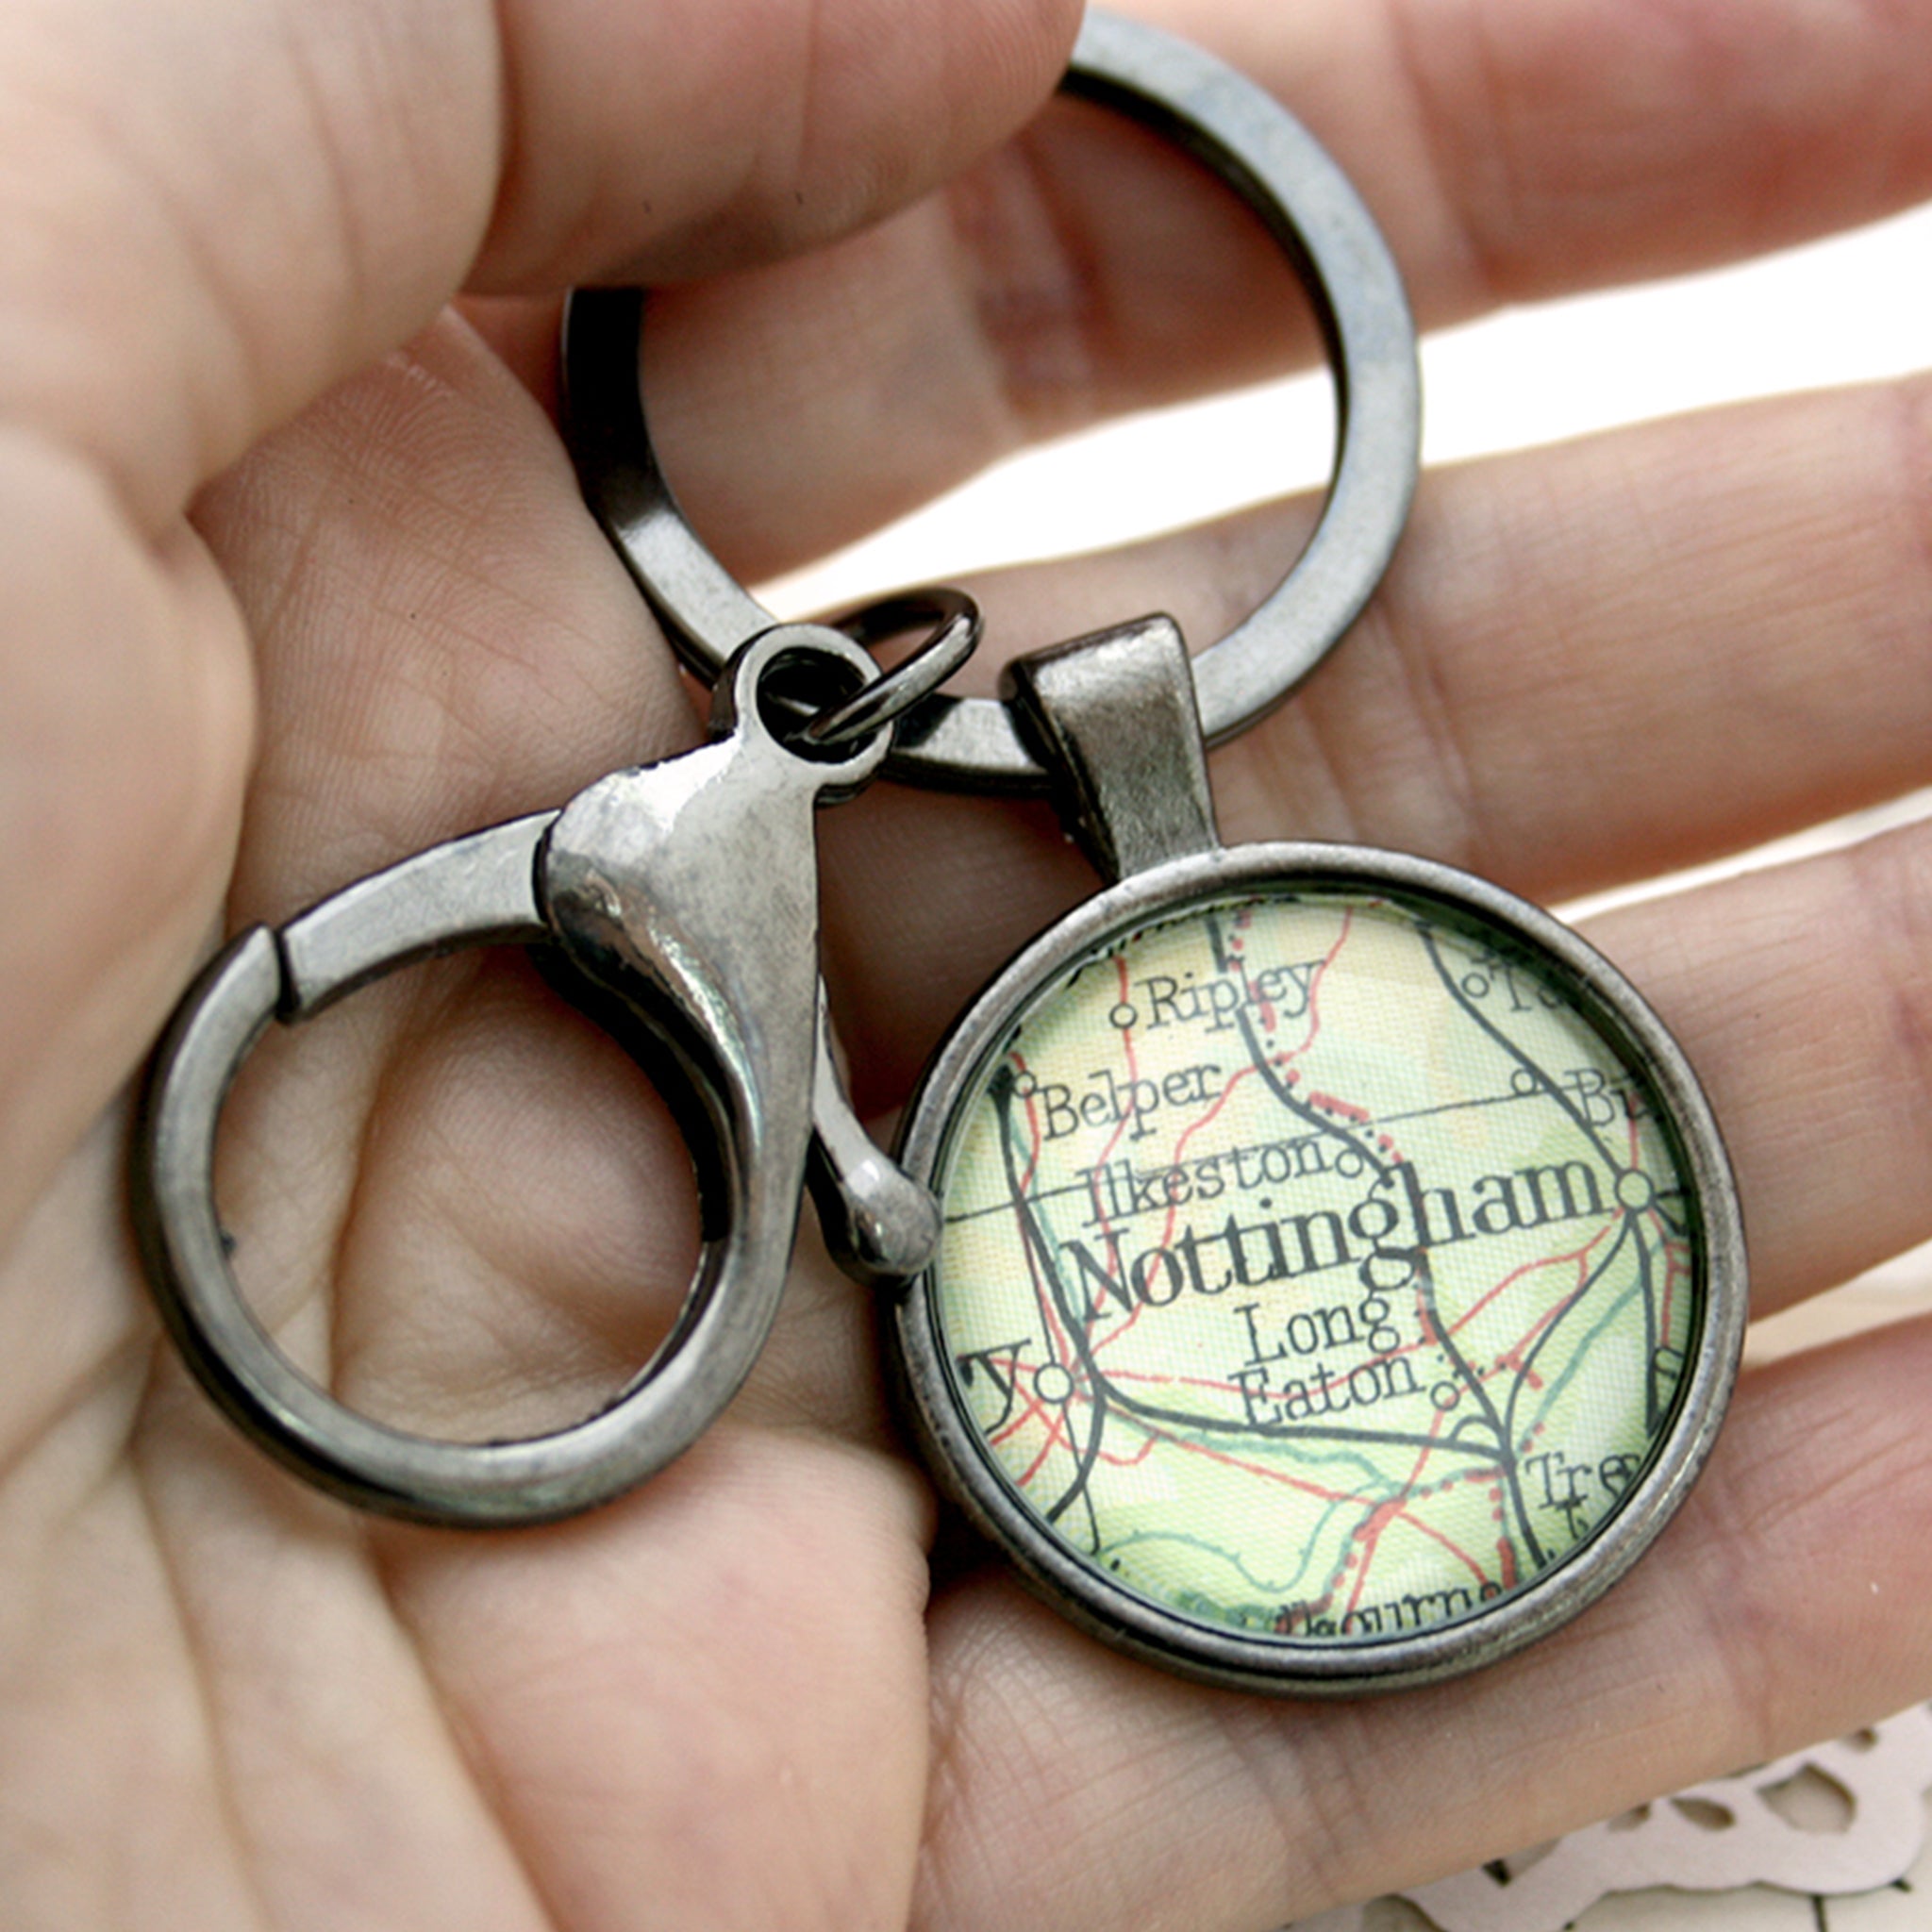 Hold in hand Personalised keyring in gunmetal black color featuring map of Nottingham